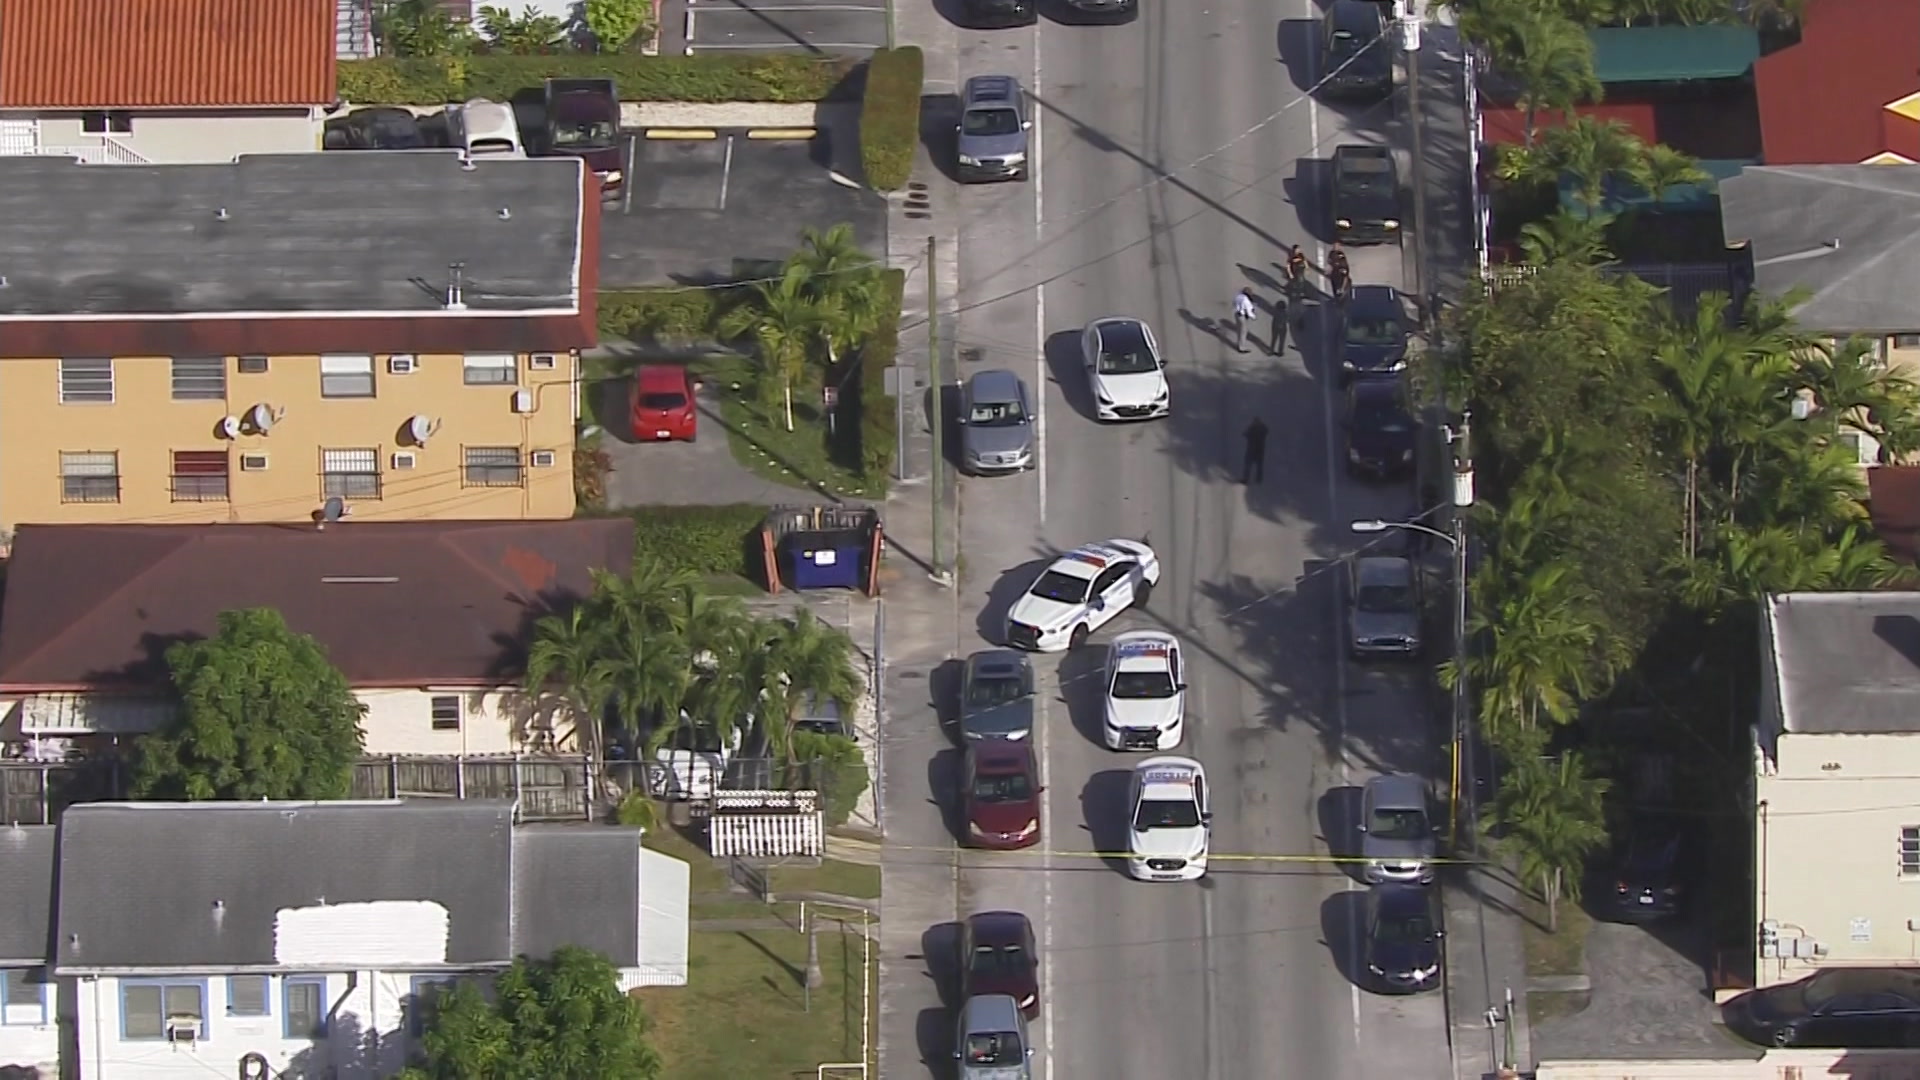 Breaking News: City Of Miami Officer Involved In Shooting